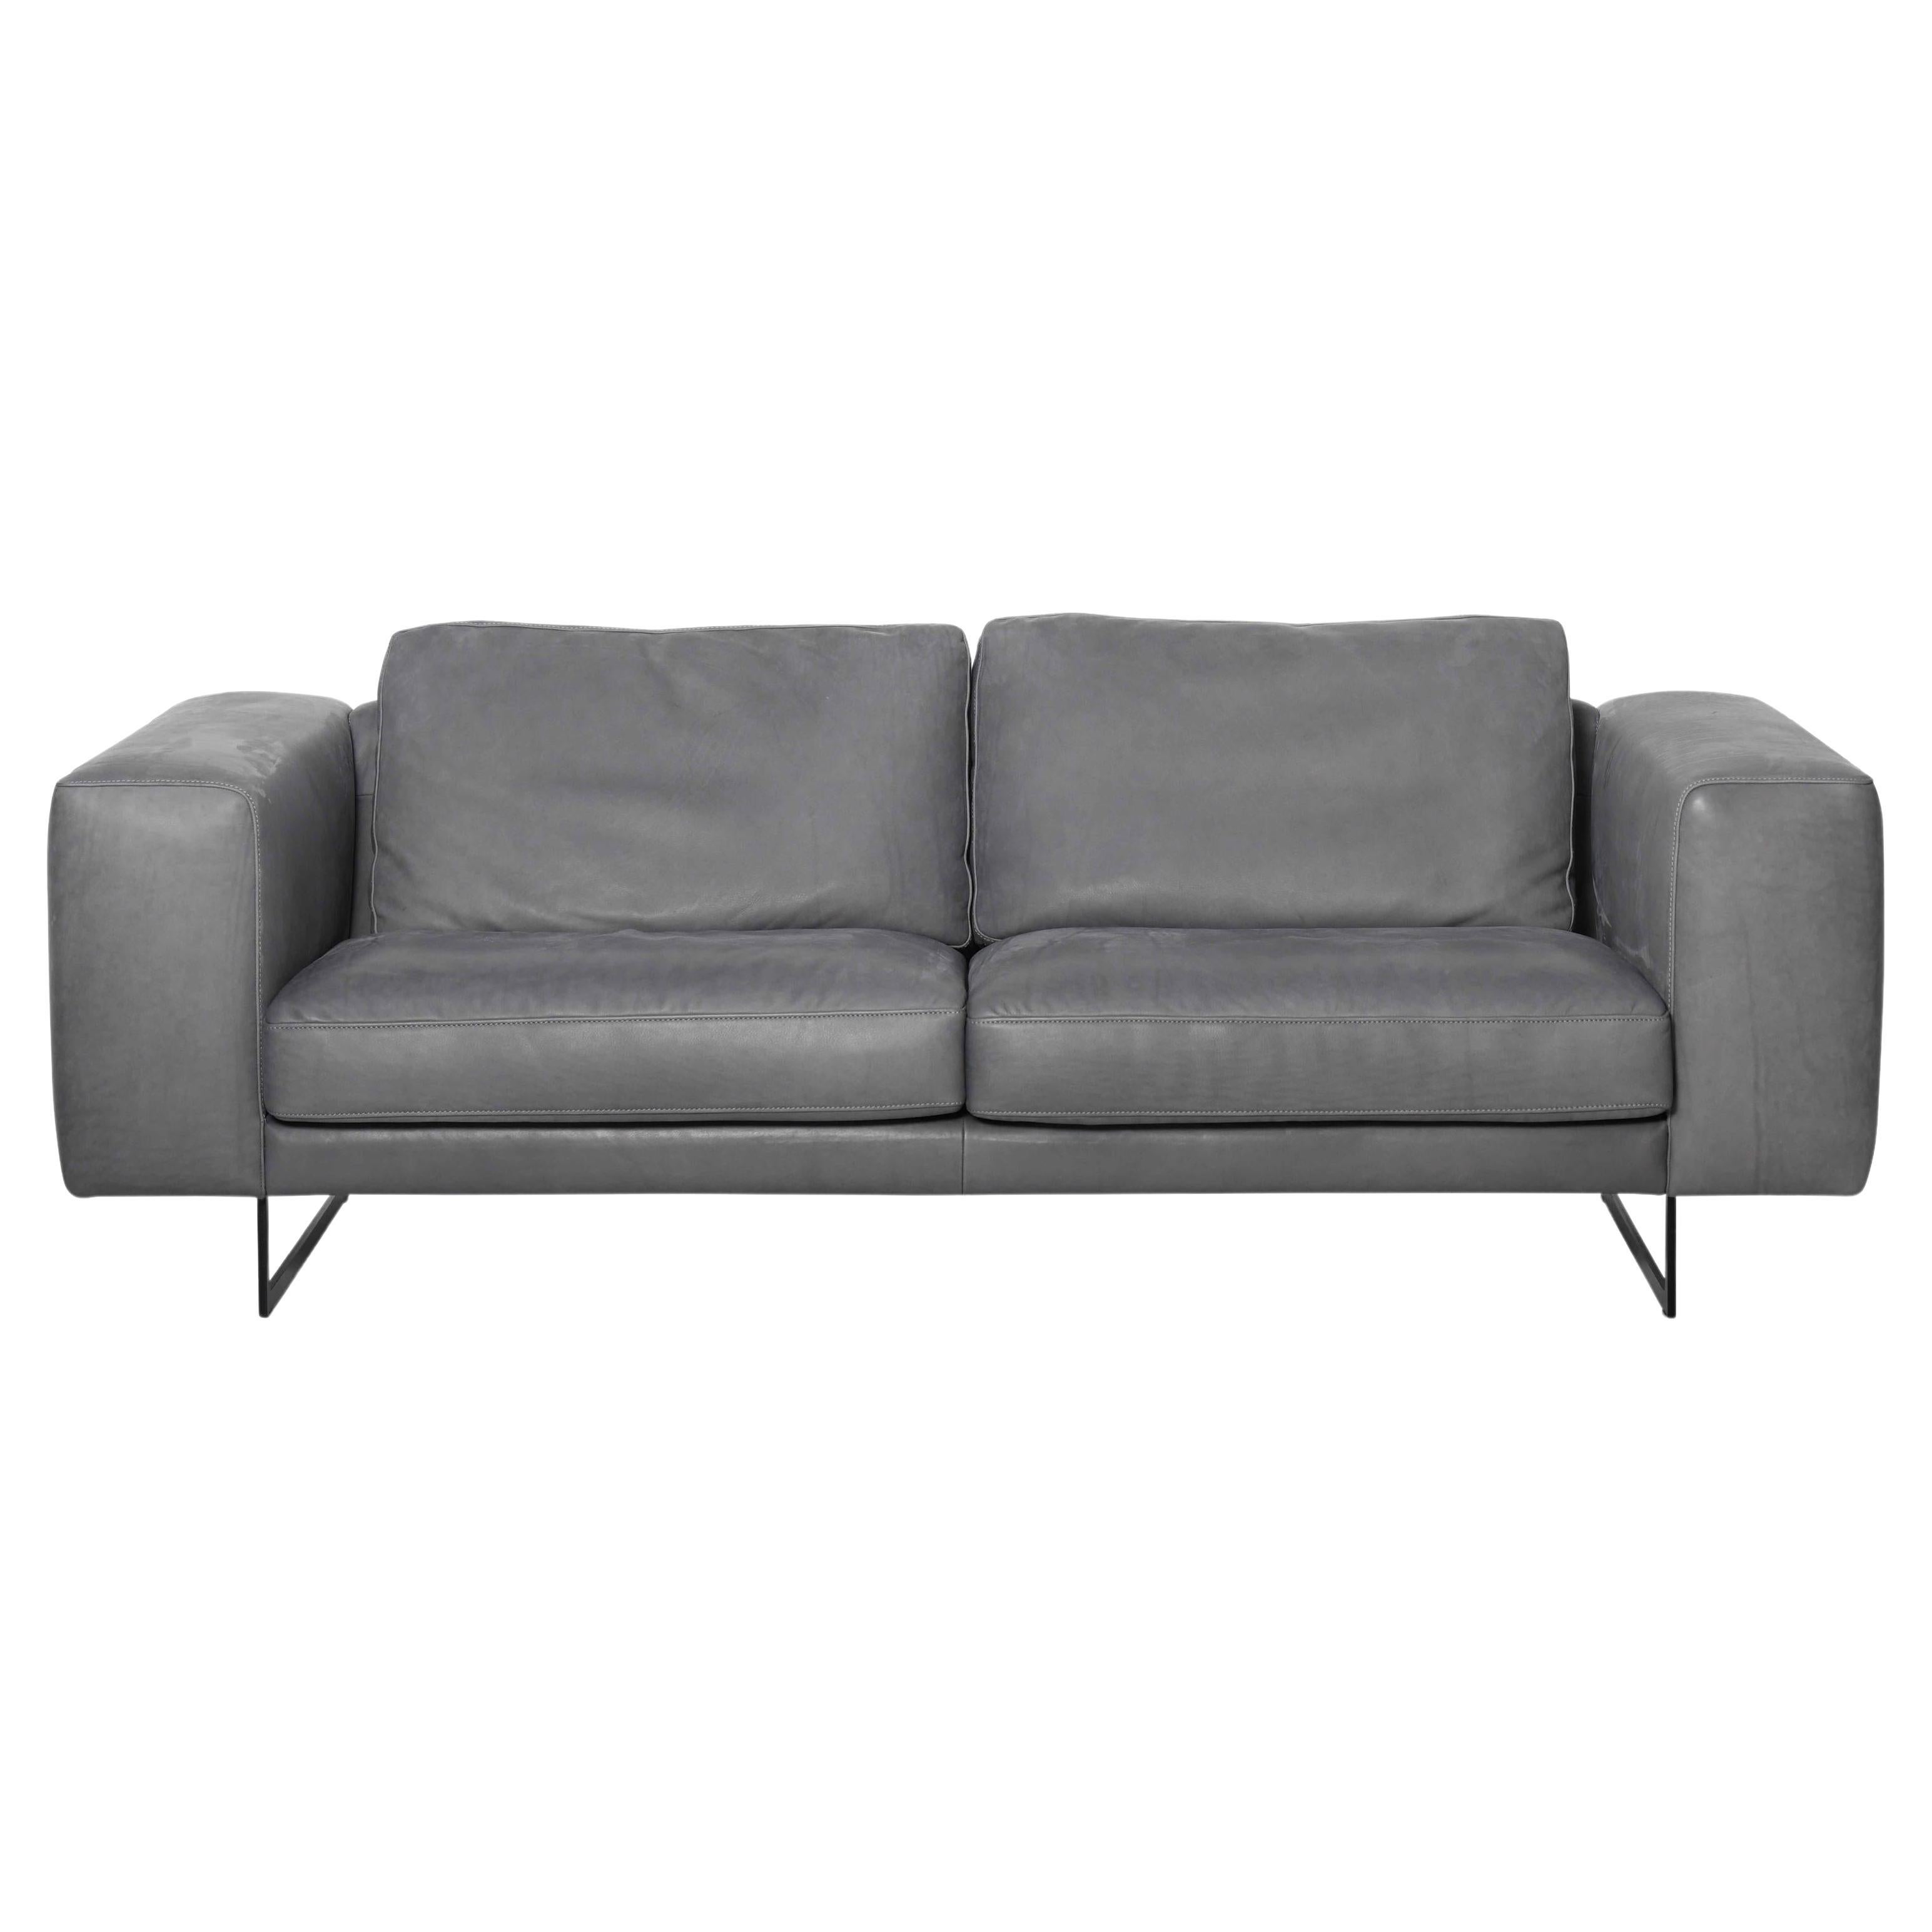 De Sede DS-748 Large Two-Seat Sofa in Paris Upholstery by Claudio Bellini For Sale